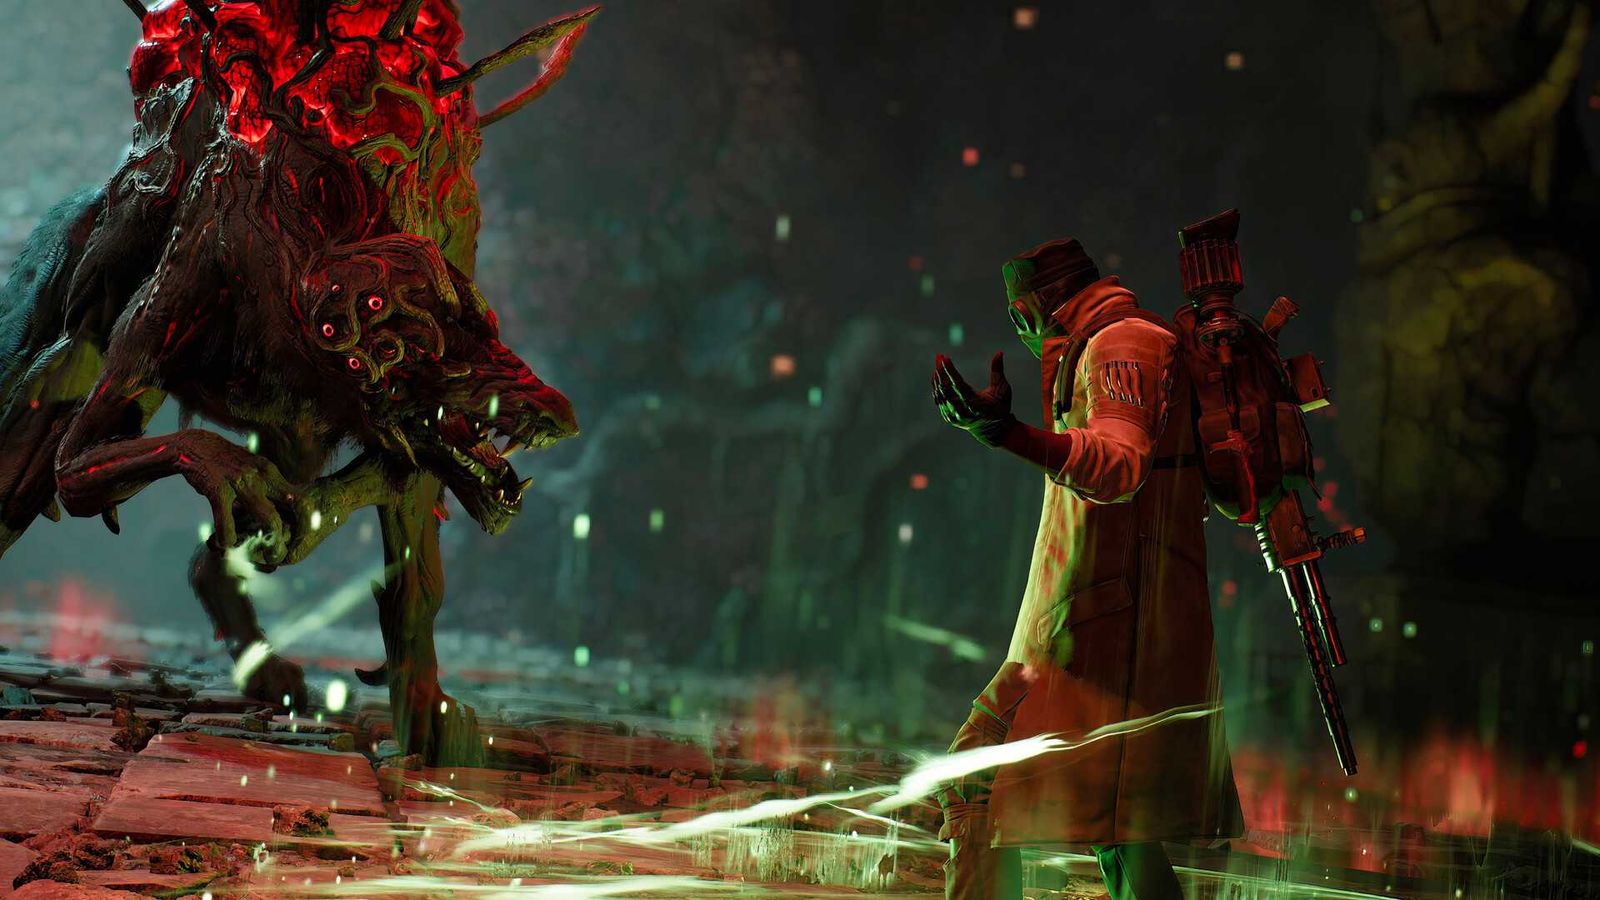 The player character fighting a monster in Remnant 2.